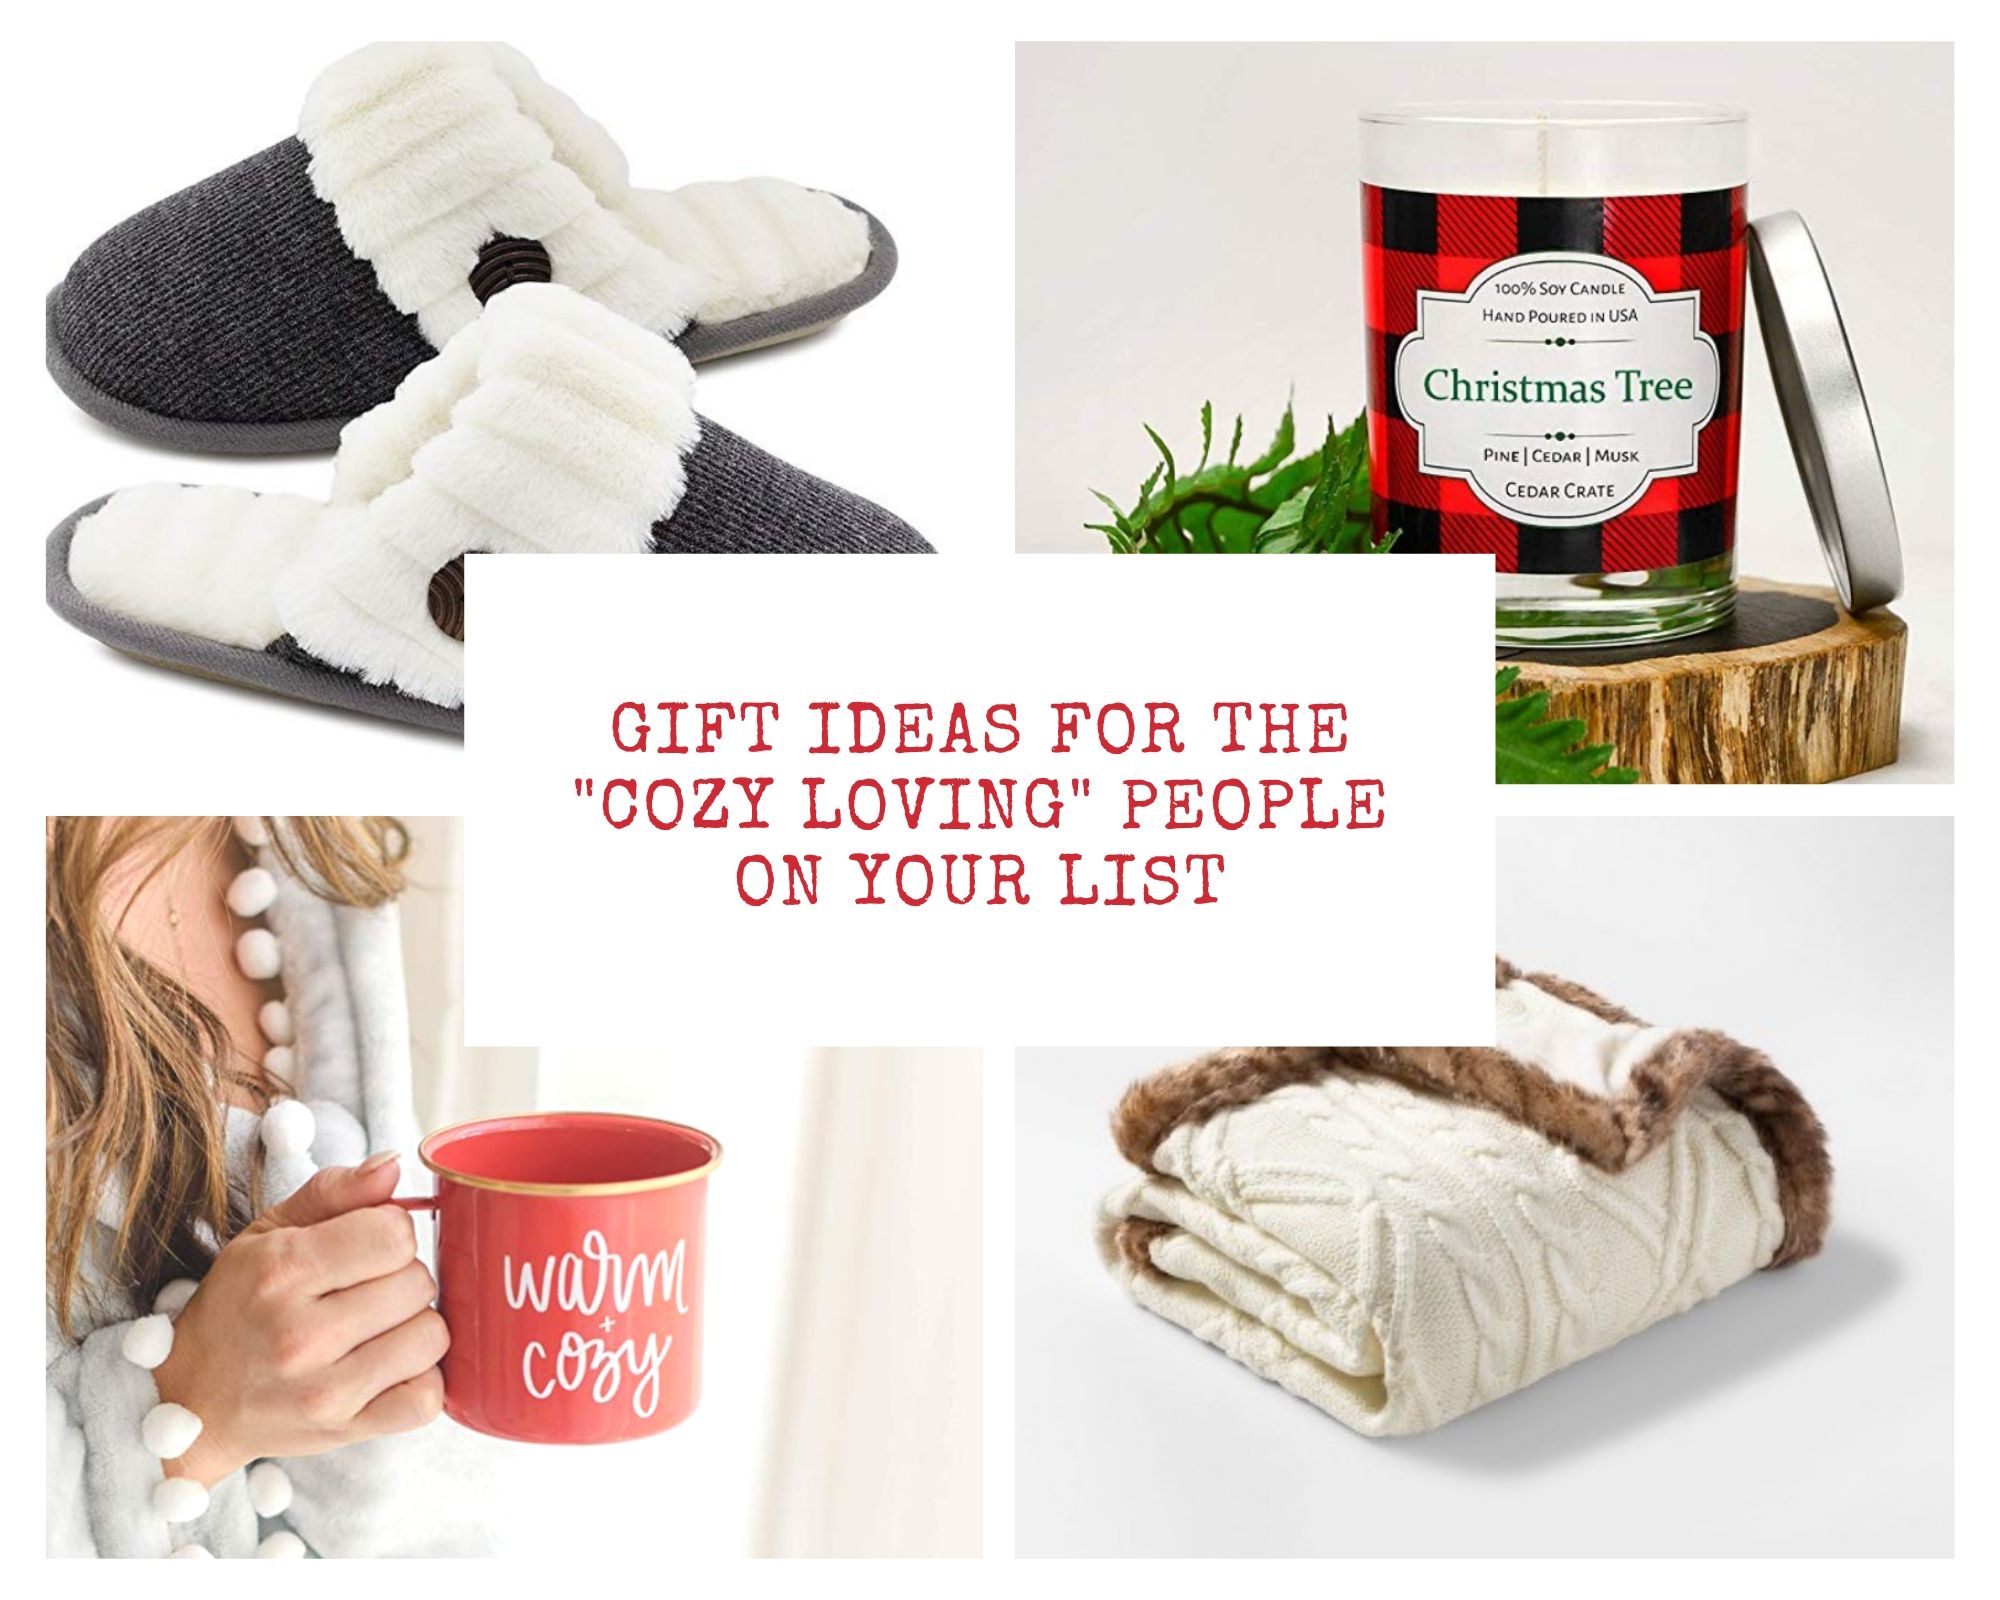 Gift Ideas for “Cozy-Loving” People on Your List!